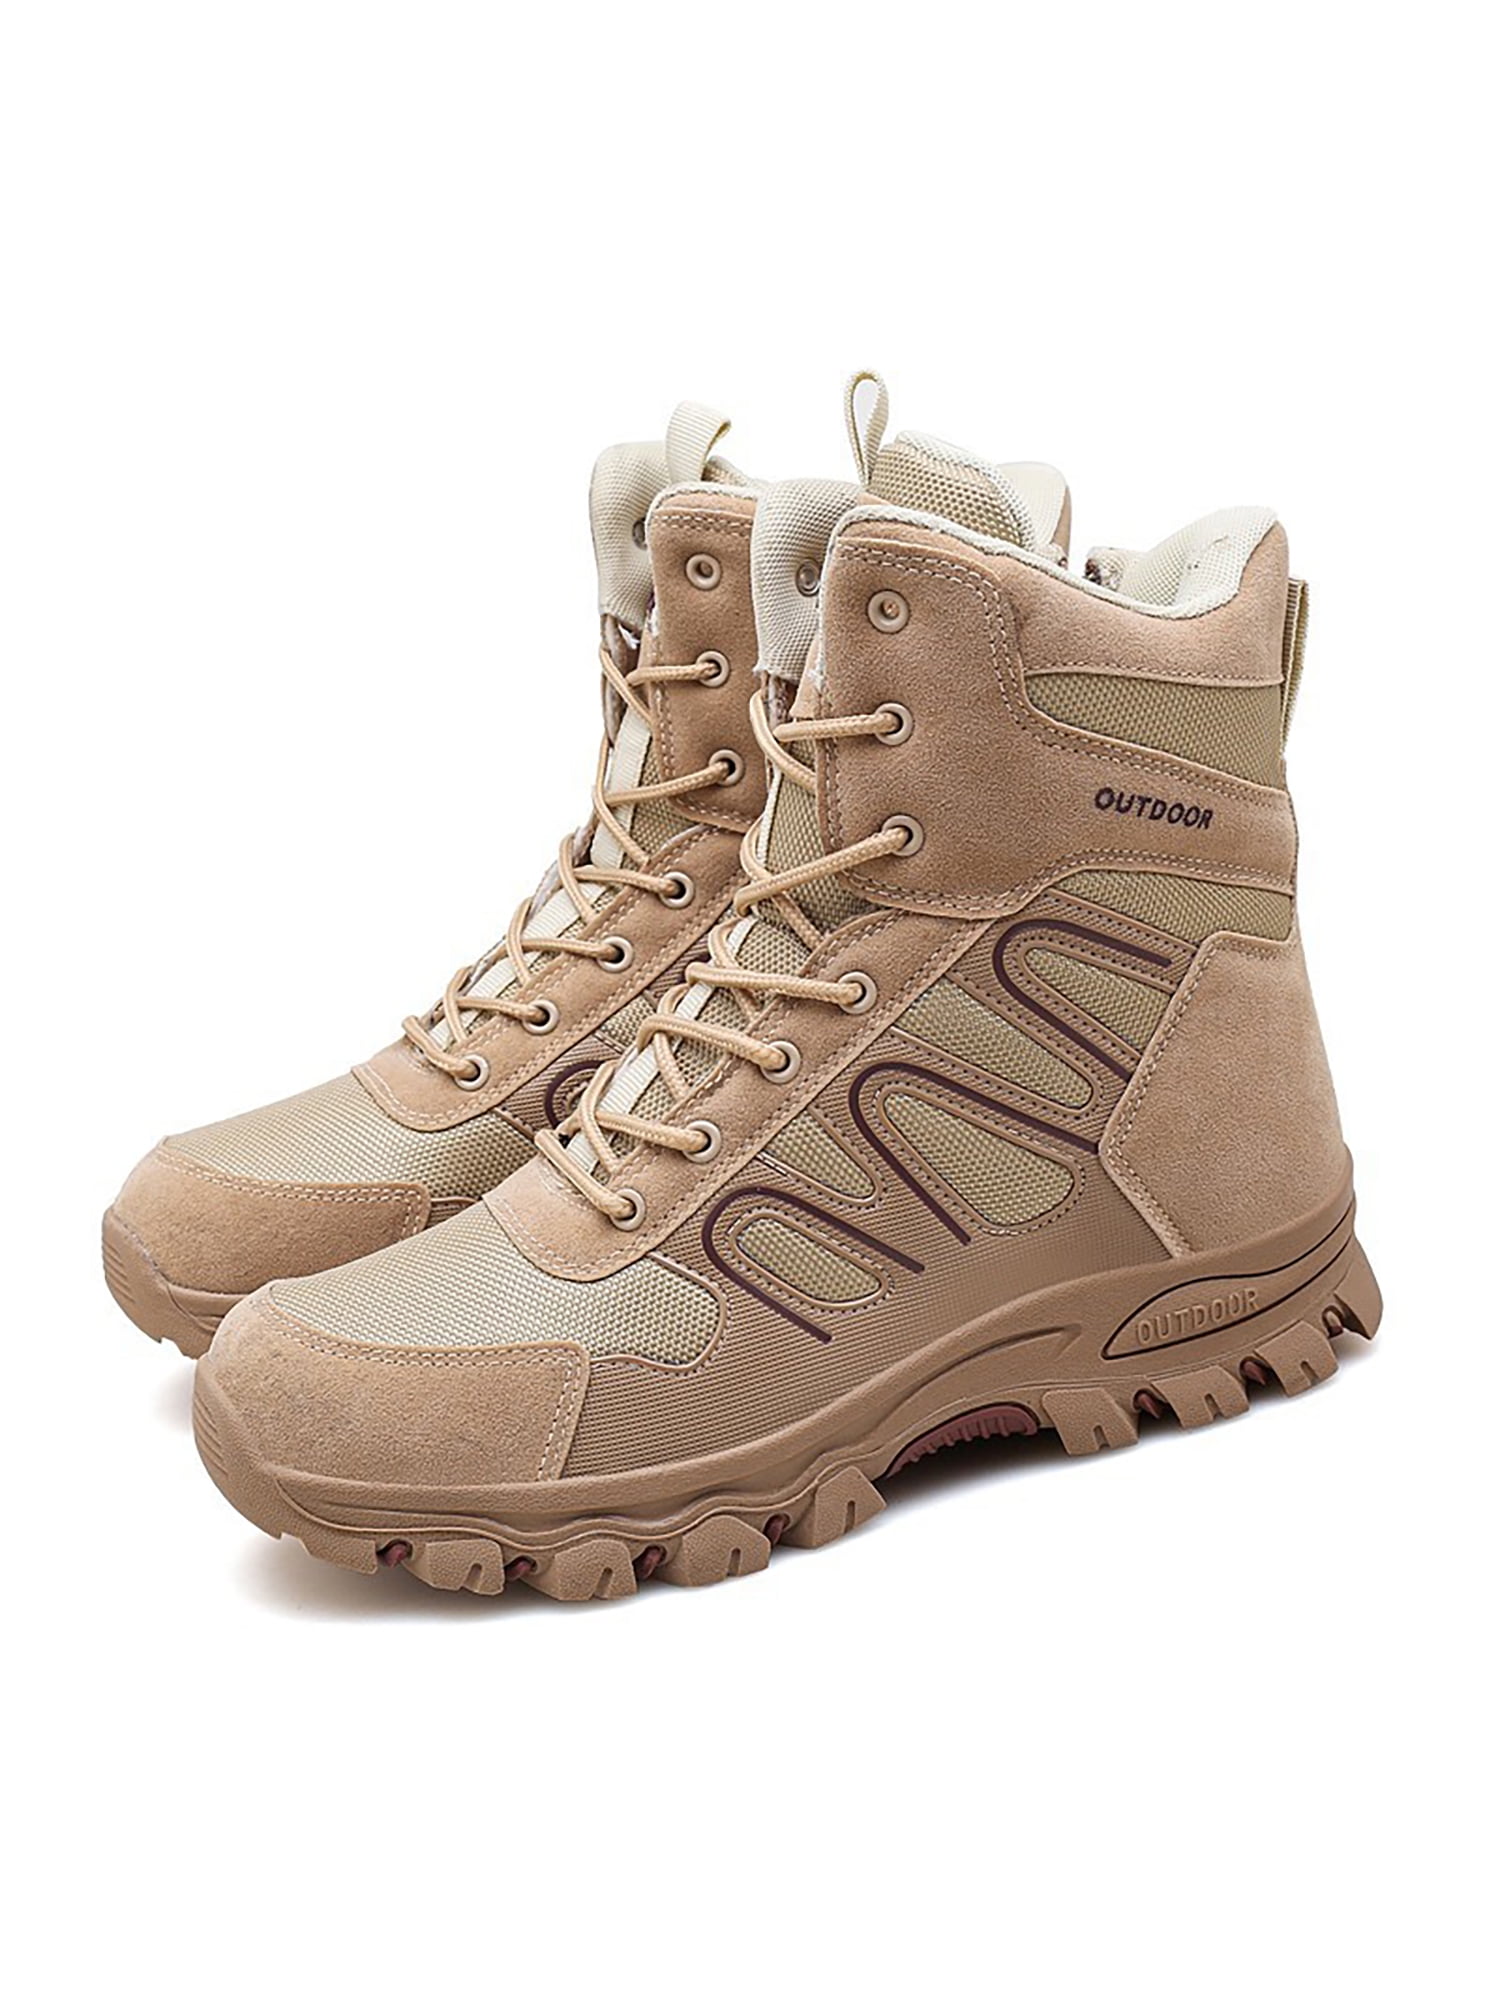 MENS SAFETY BOOTS ARMY MILITARY POLICE STEEL TOE CAP COMBAT WORK ZIP SHOES SIZE 